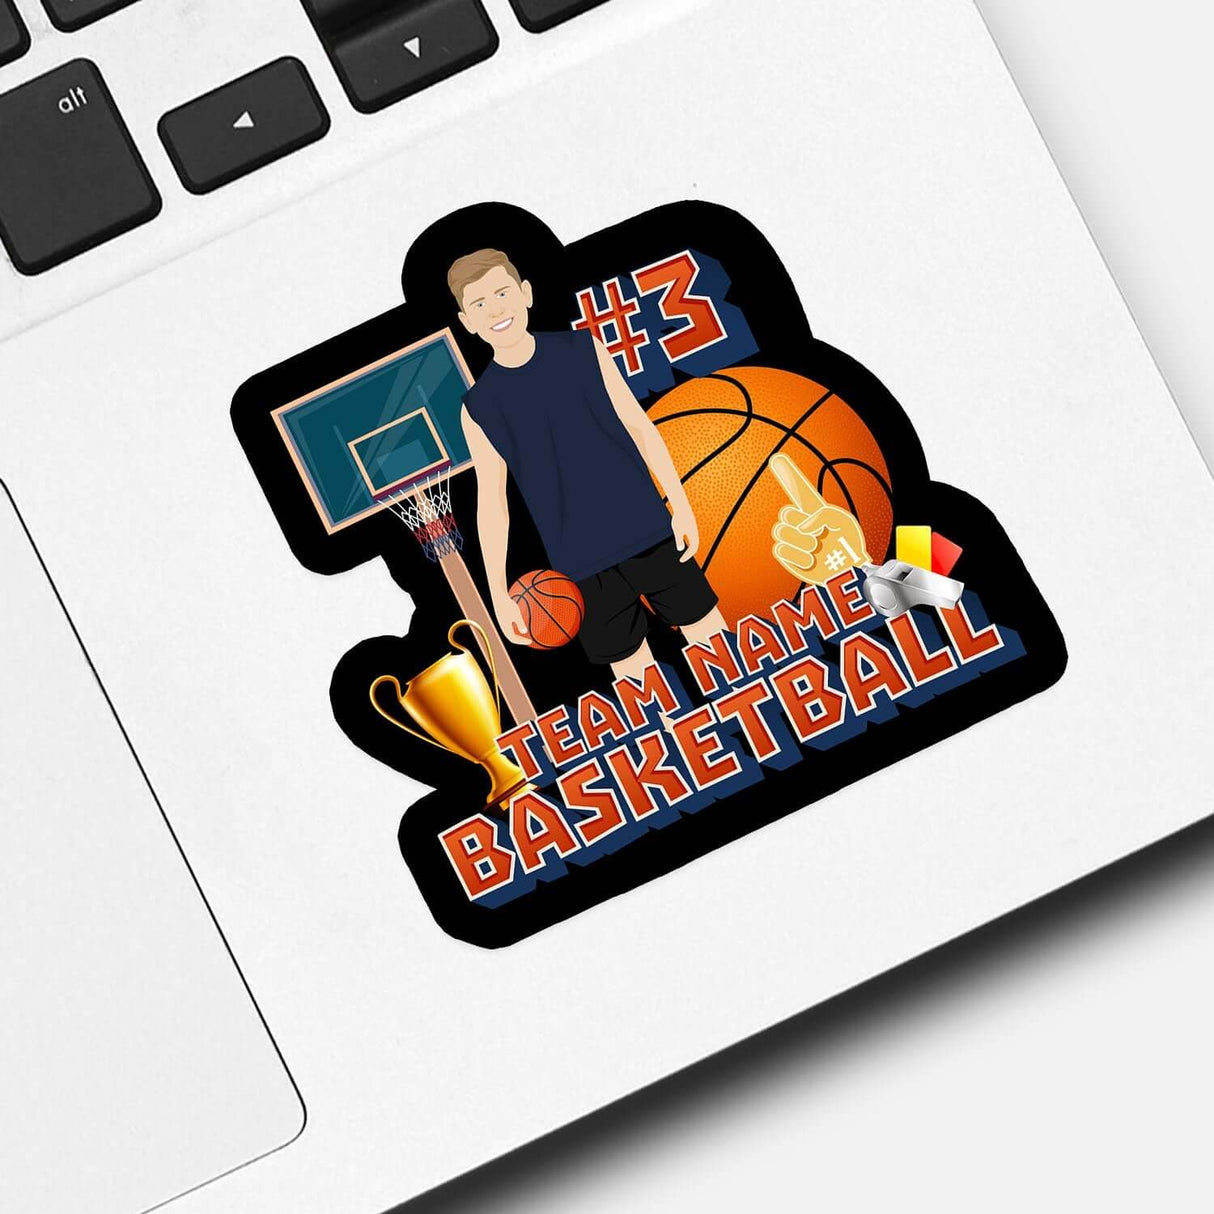 Team Name Basketball Personalized Sticker